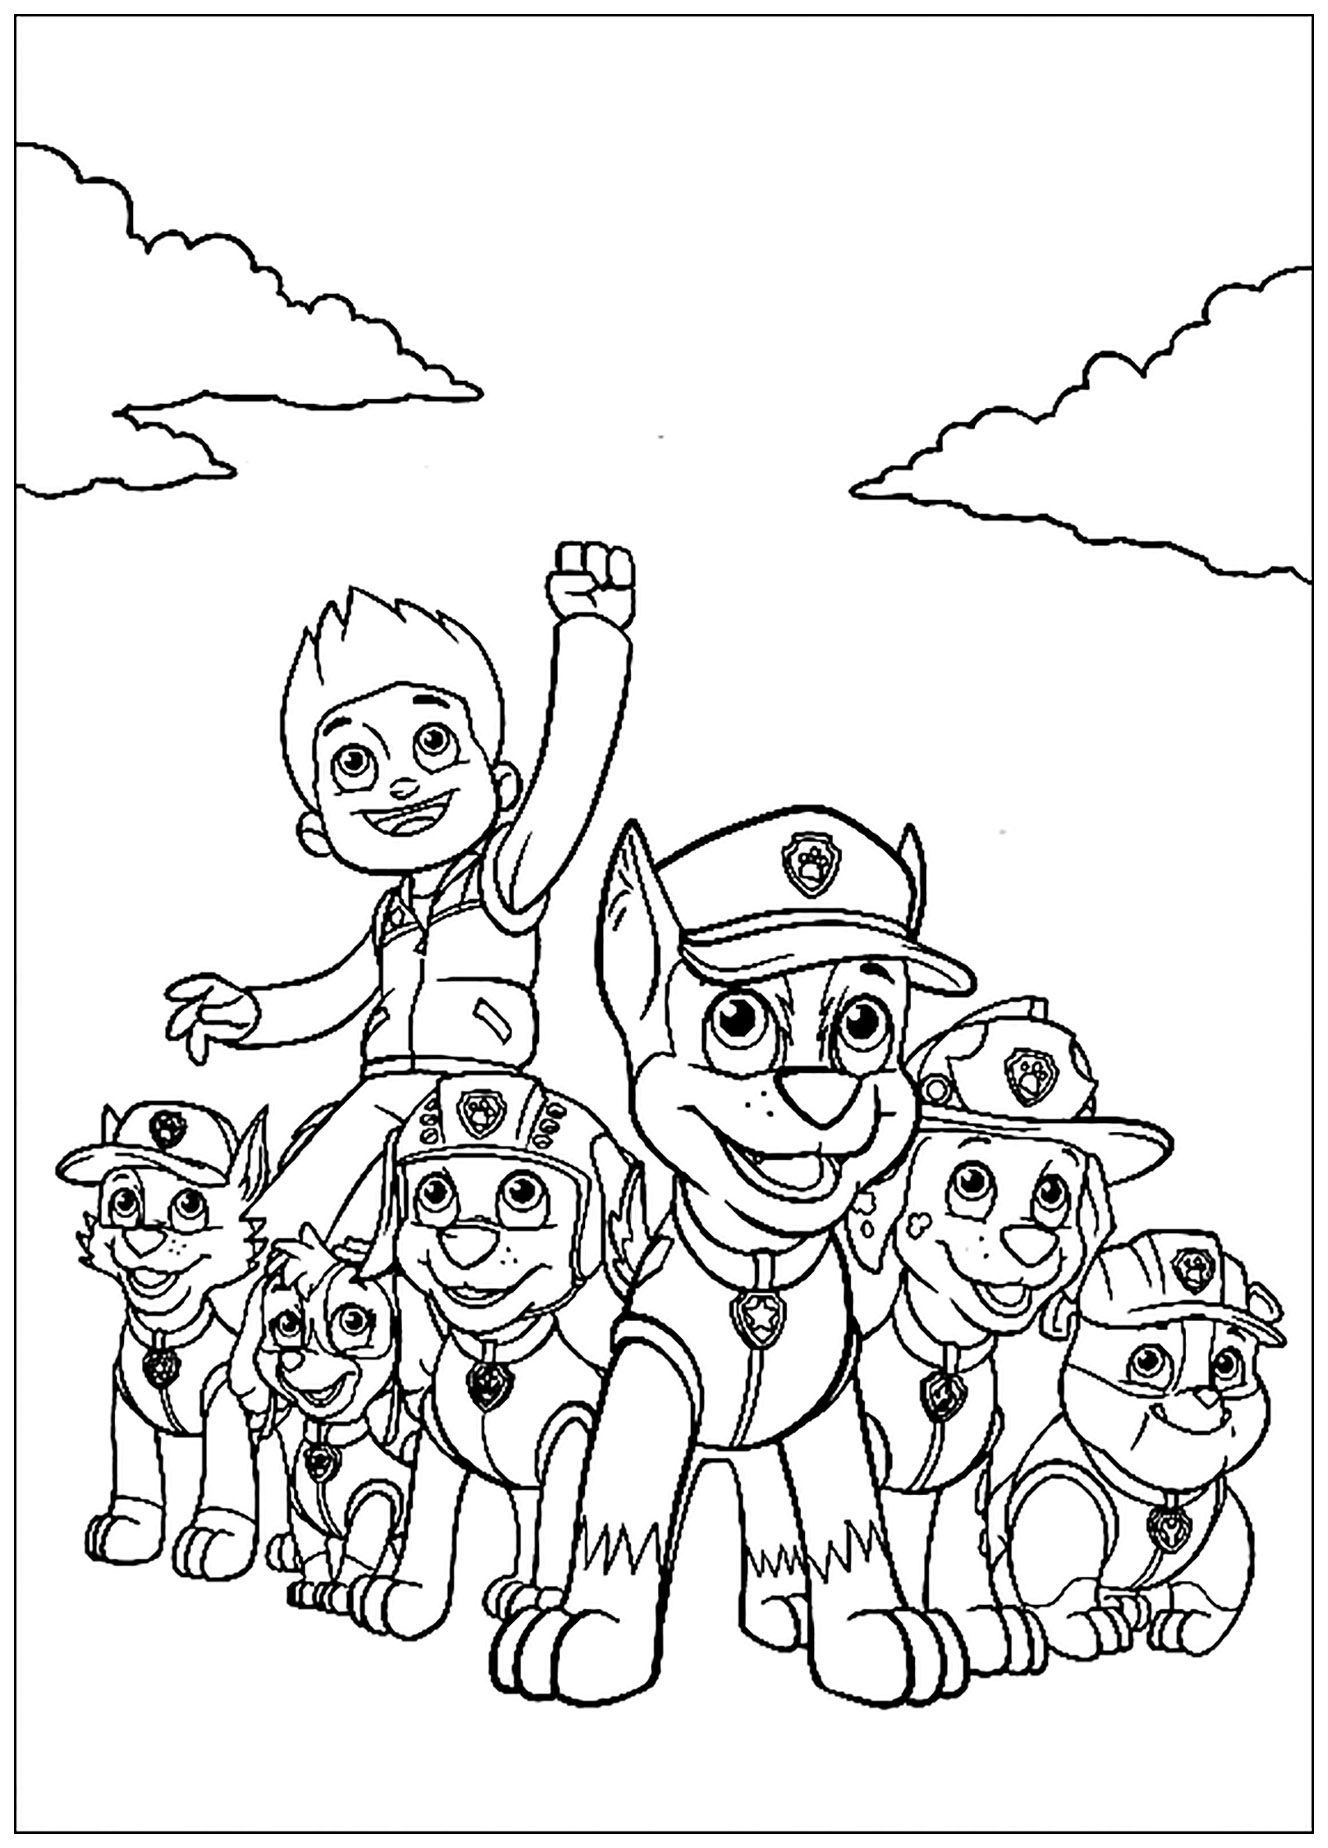 Paw Patrol Coloring Pages FREE Printable 26